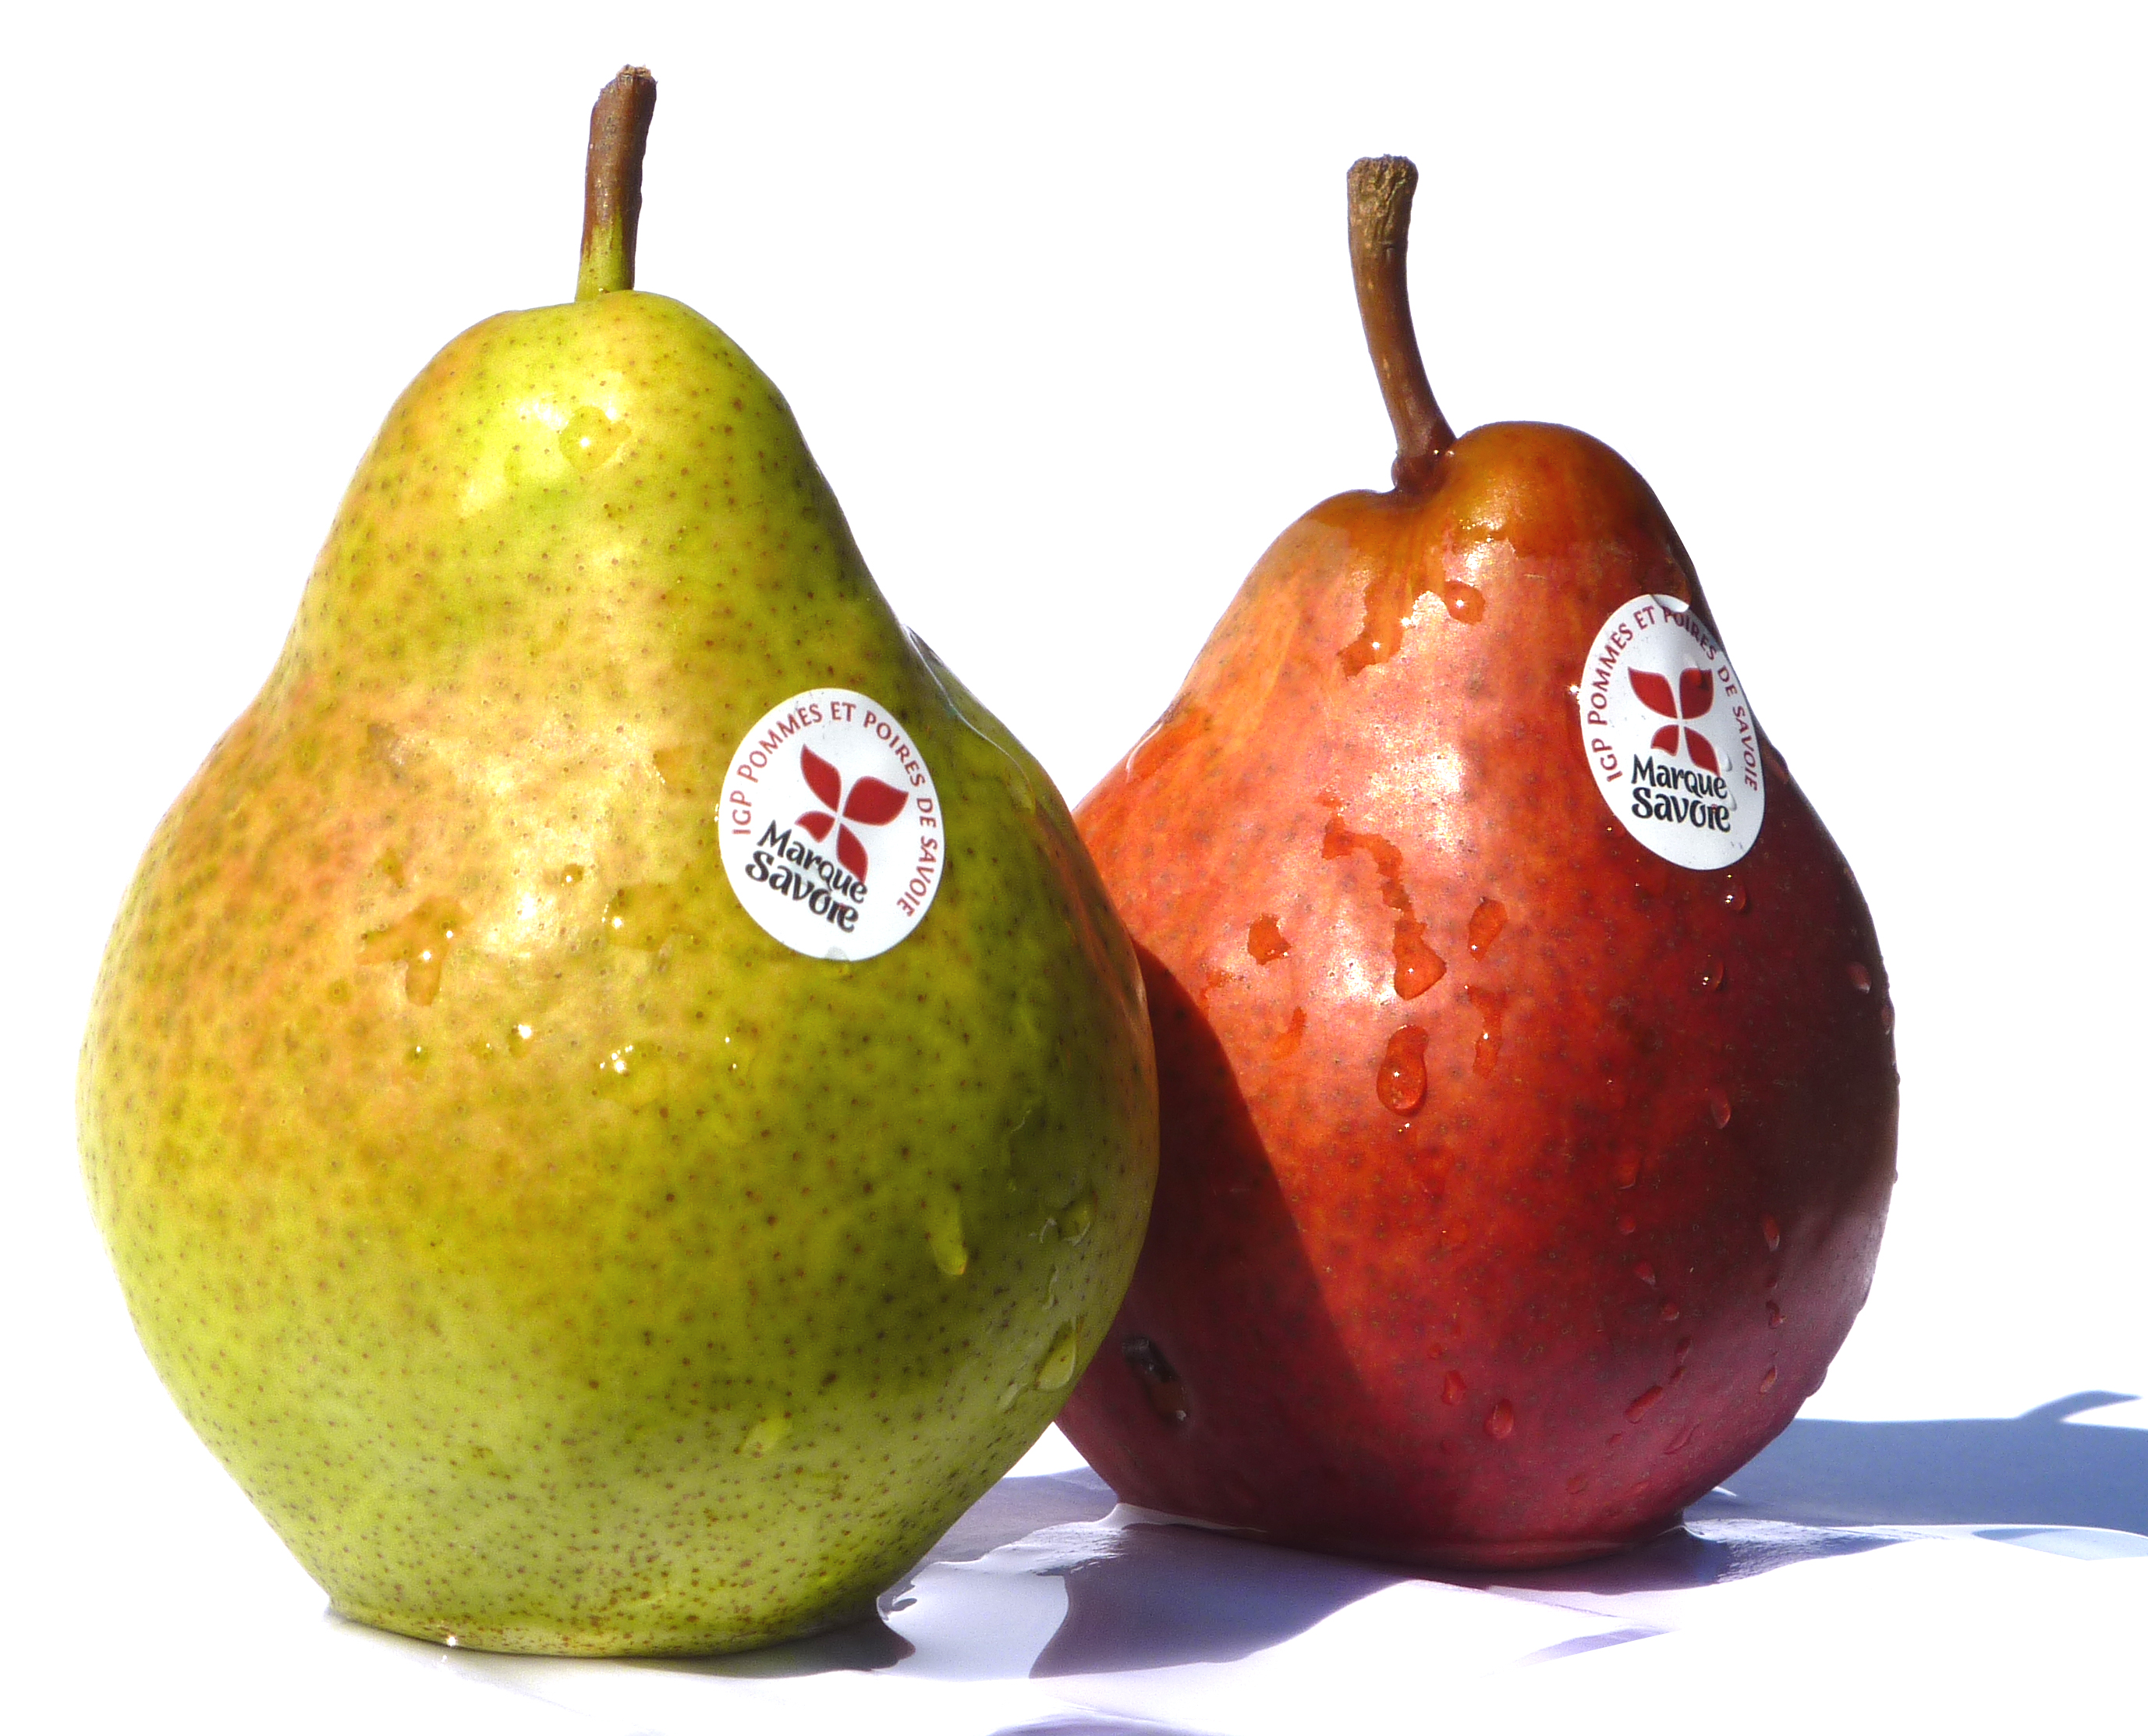 Photo of some French Williams' pears